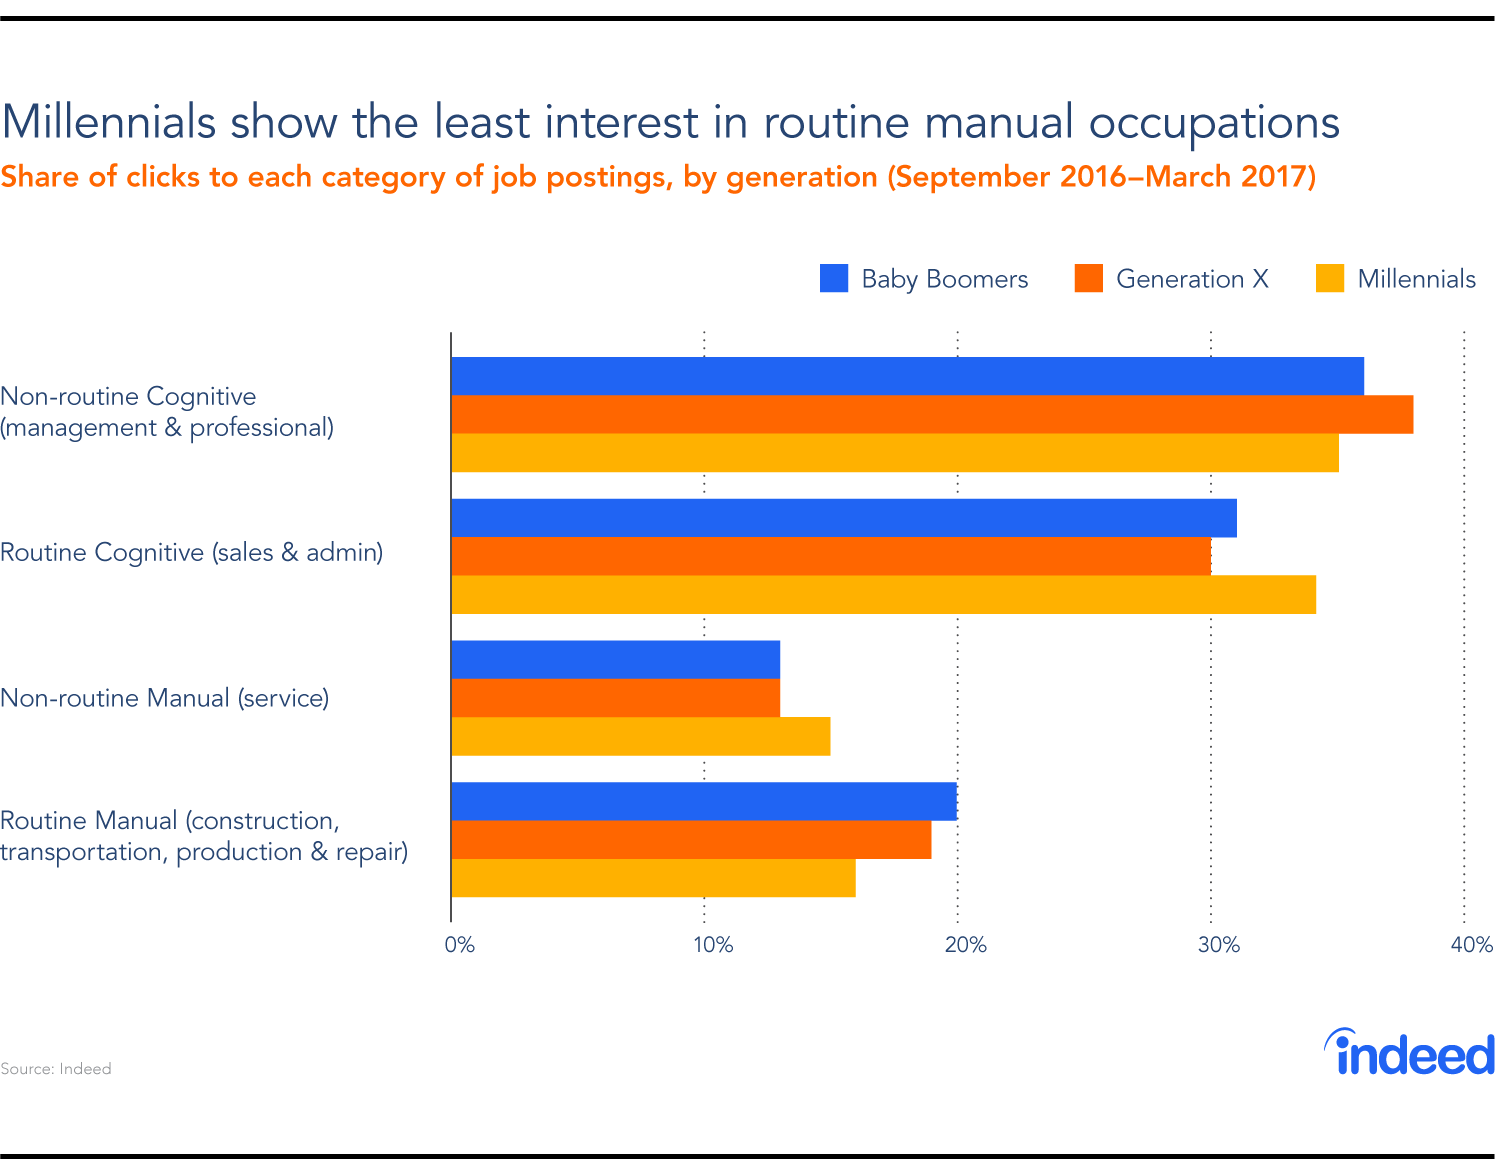 Millennials show the least interest in routine manual occupations.